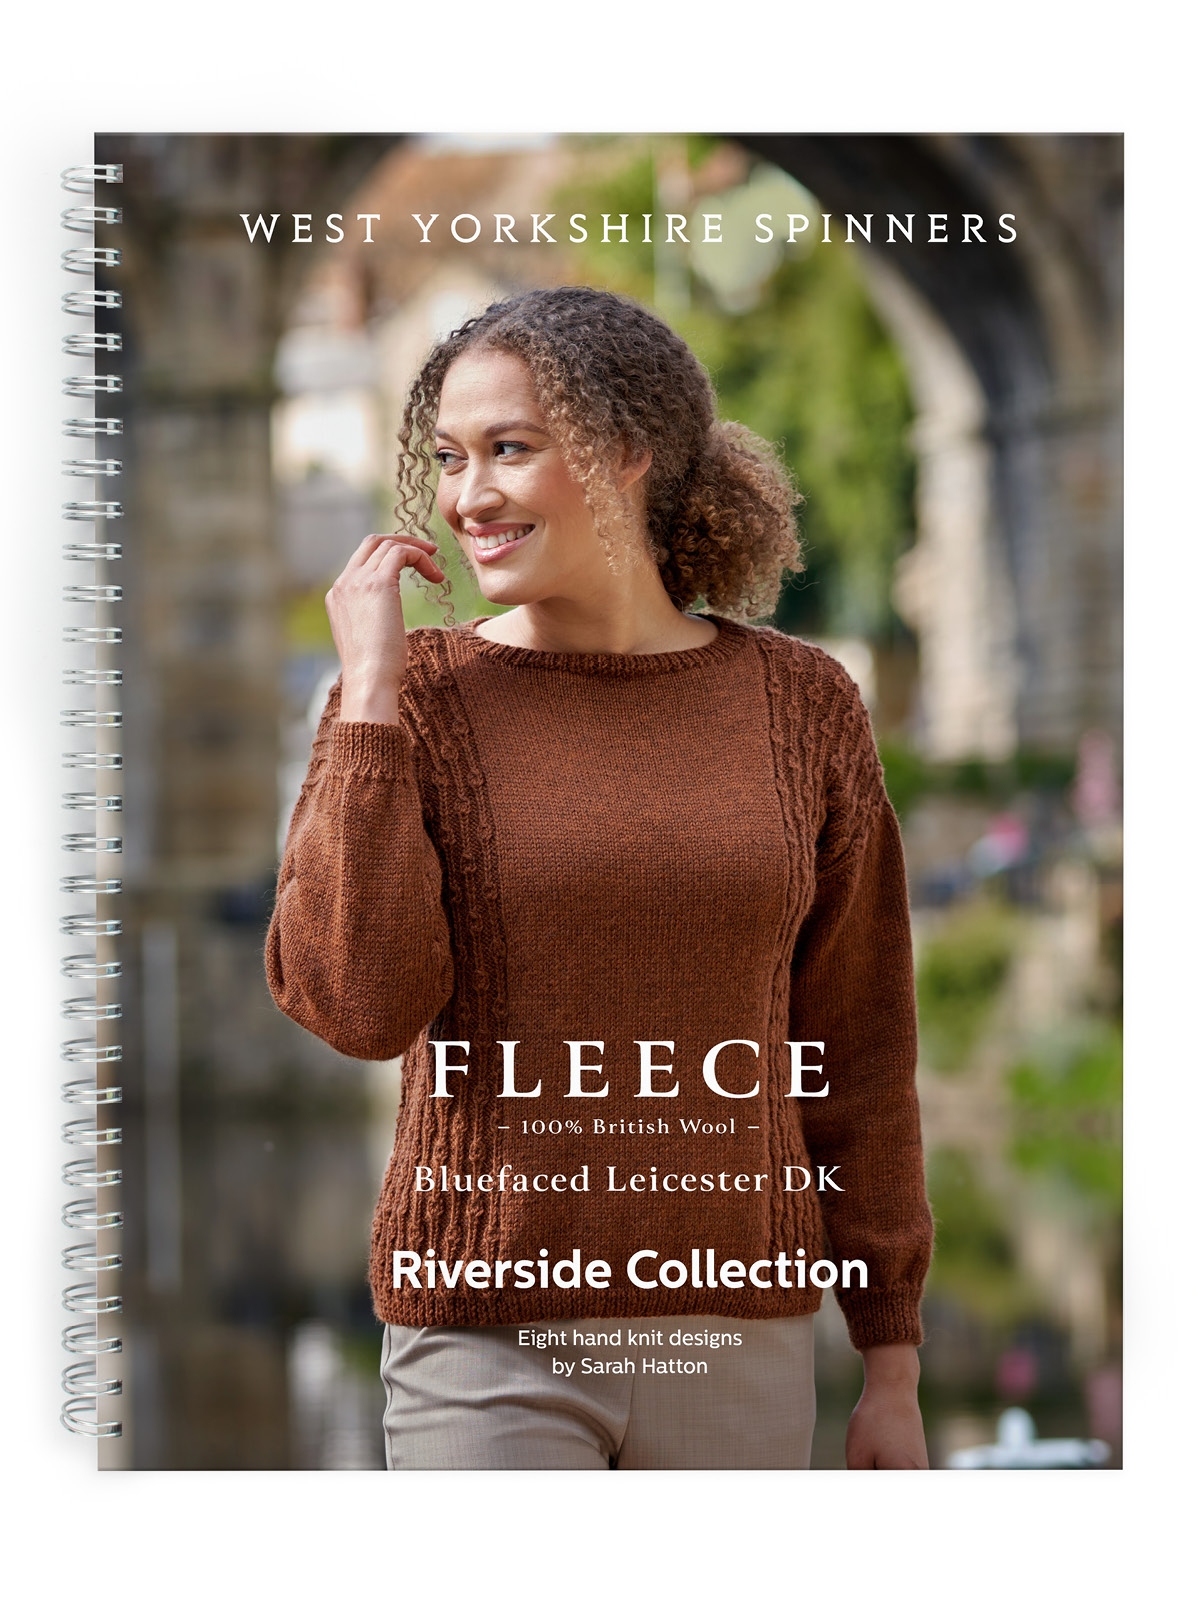 West Yorkshire Spinners - Riverside Collection  Pattern Book product image